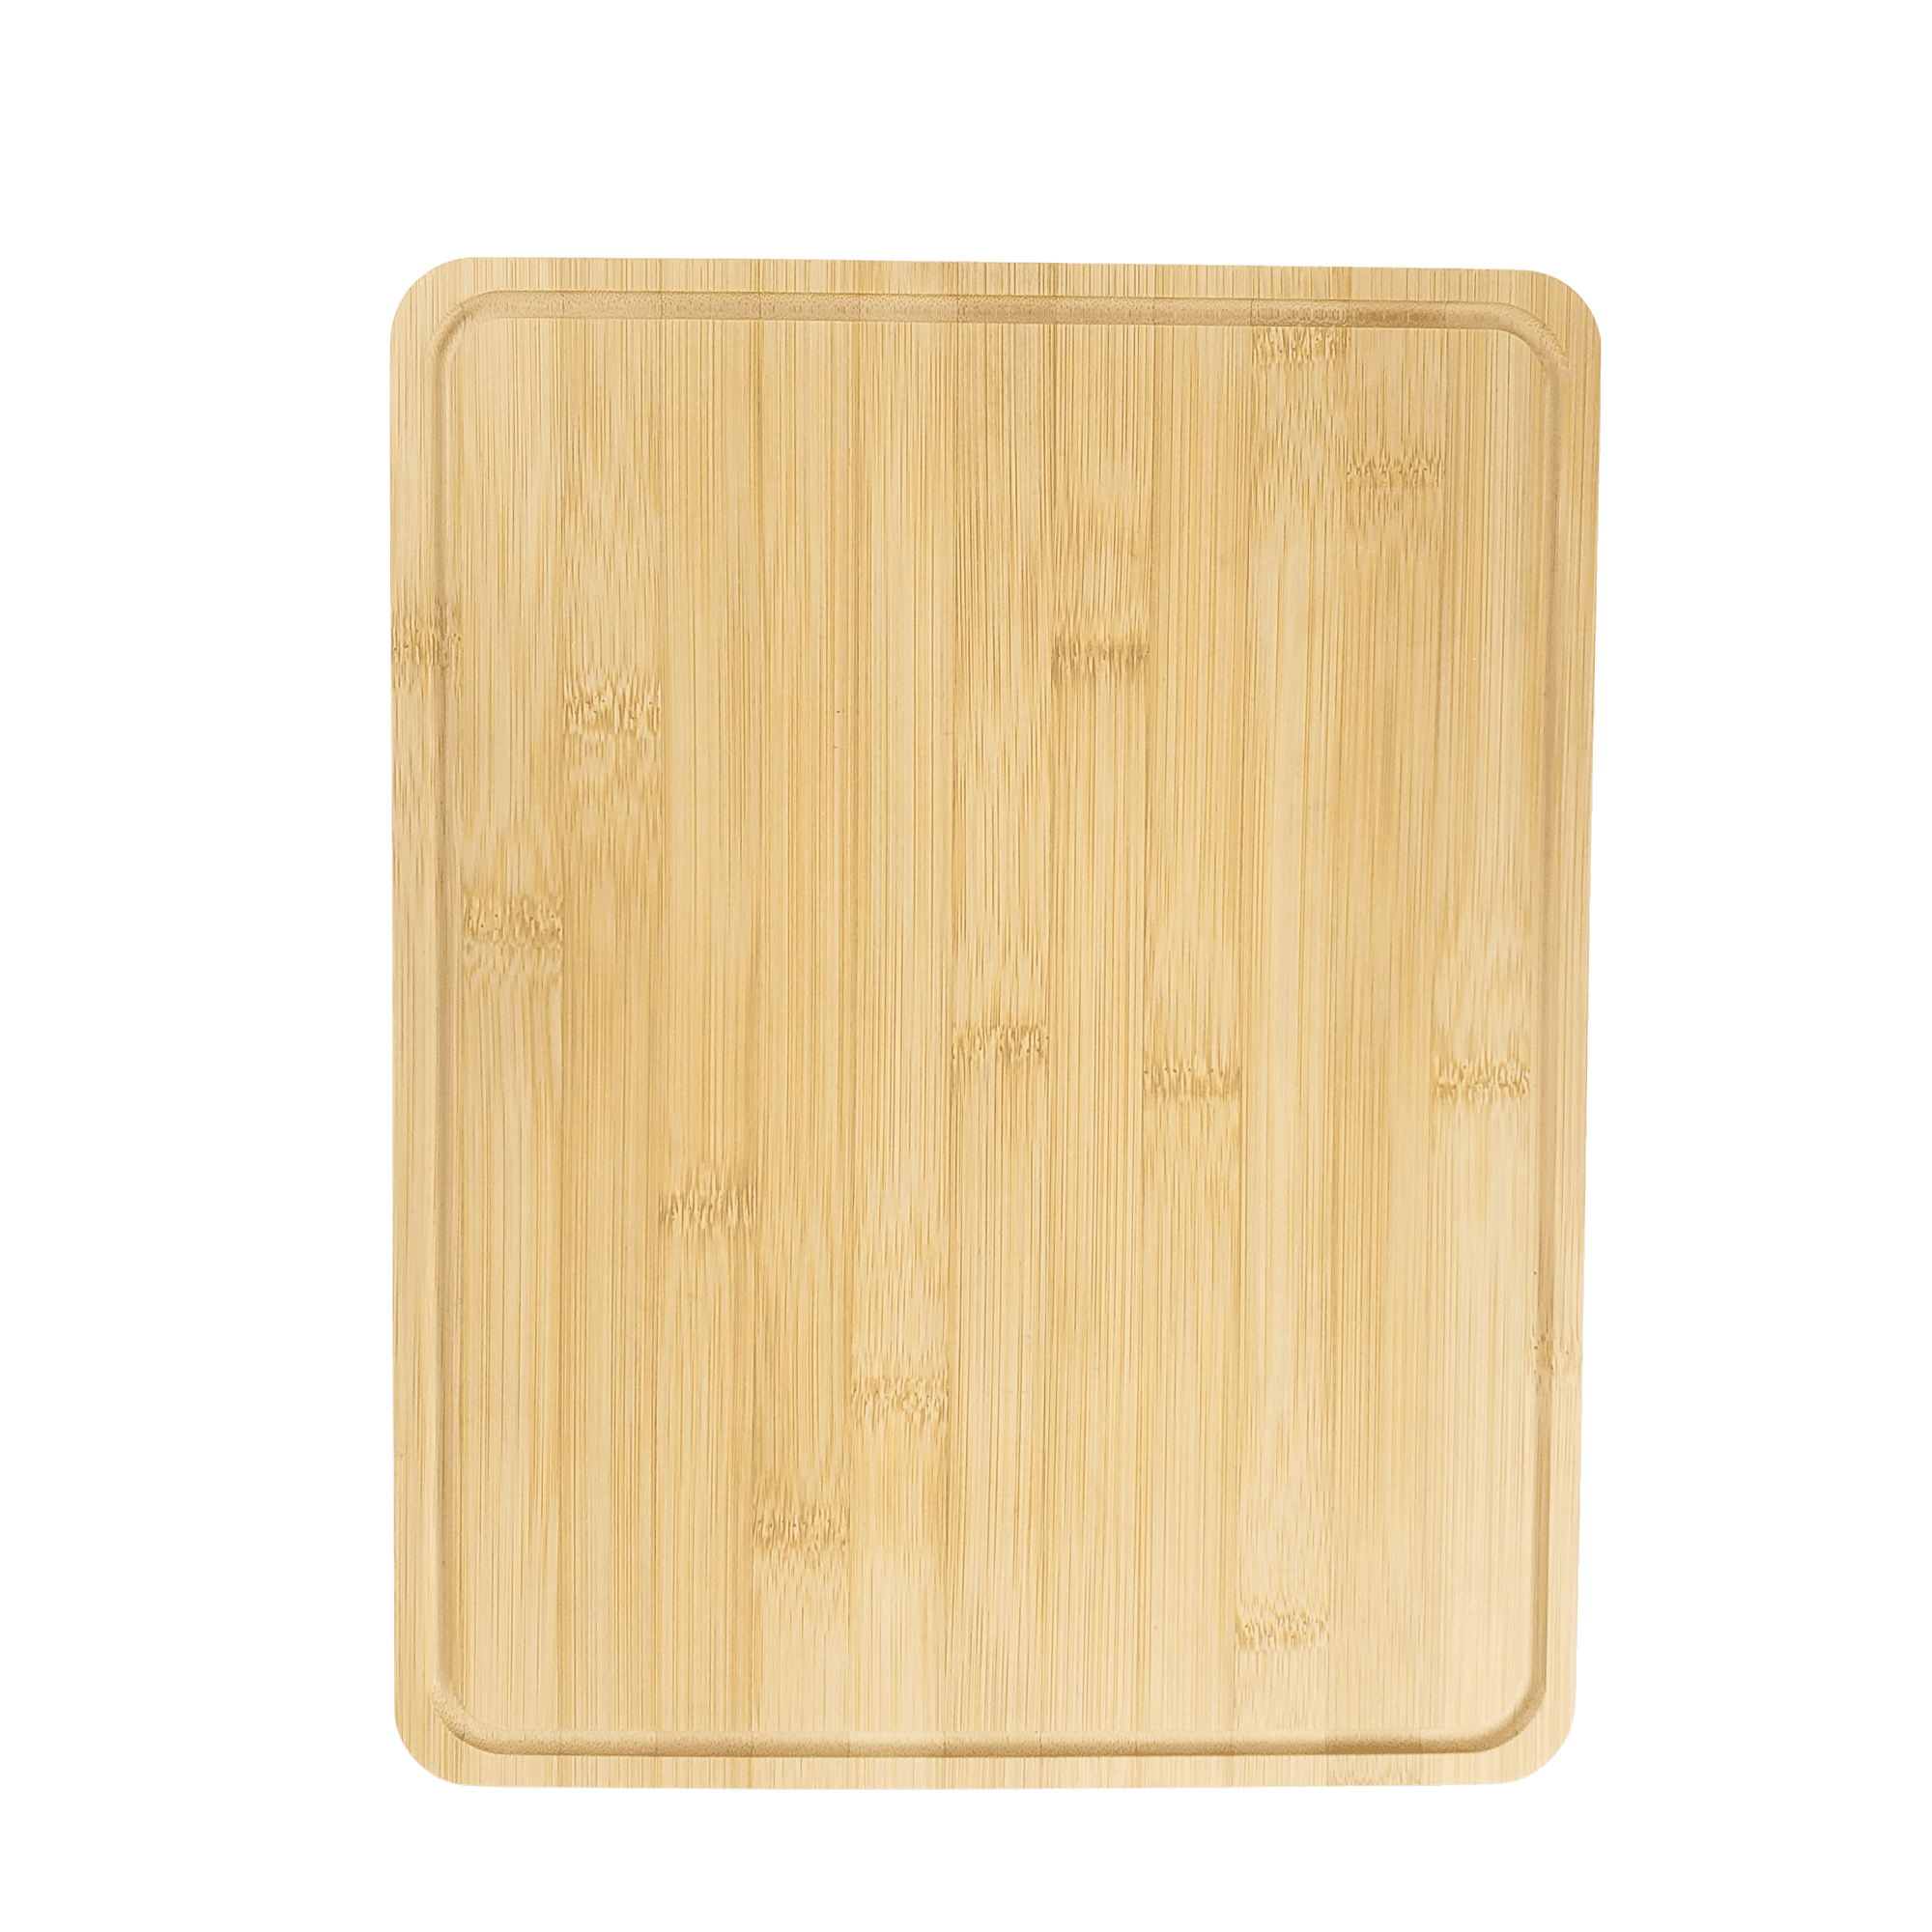 Bulk Plain Bamboo Paddle Cutting Board (Set of 10) | for Customized, Personalized Engraving Purpose | Wholesale Premium Blank Bamboo Board (Handle